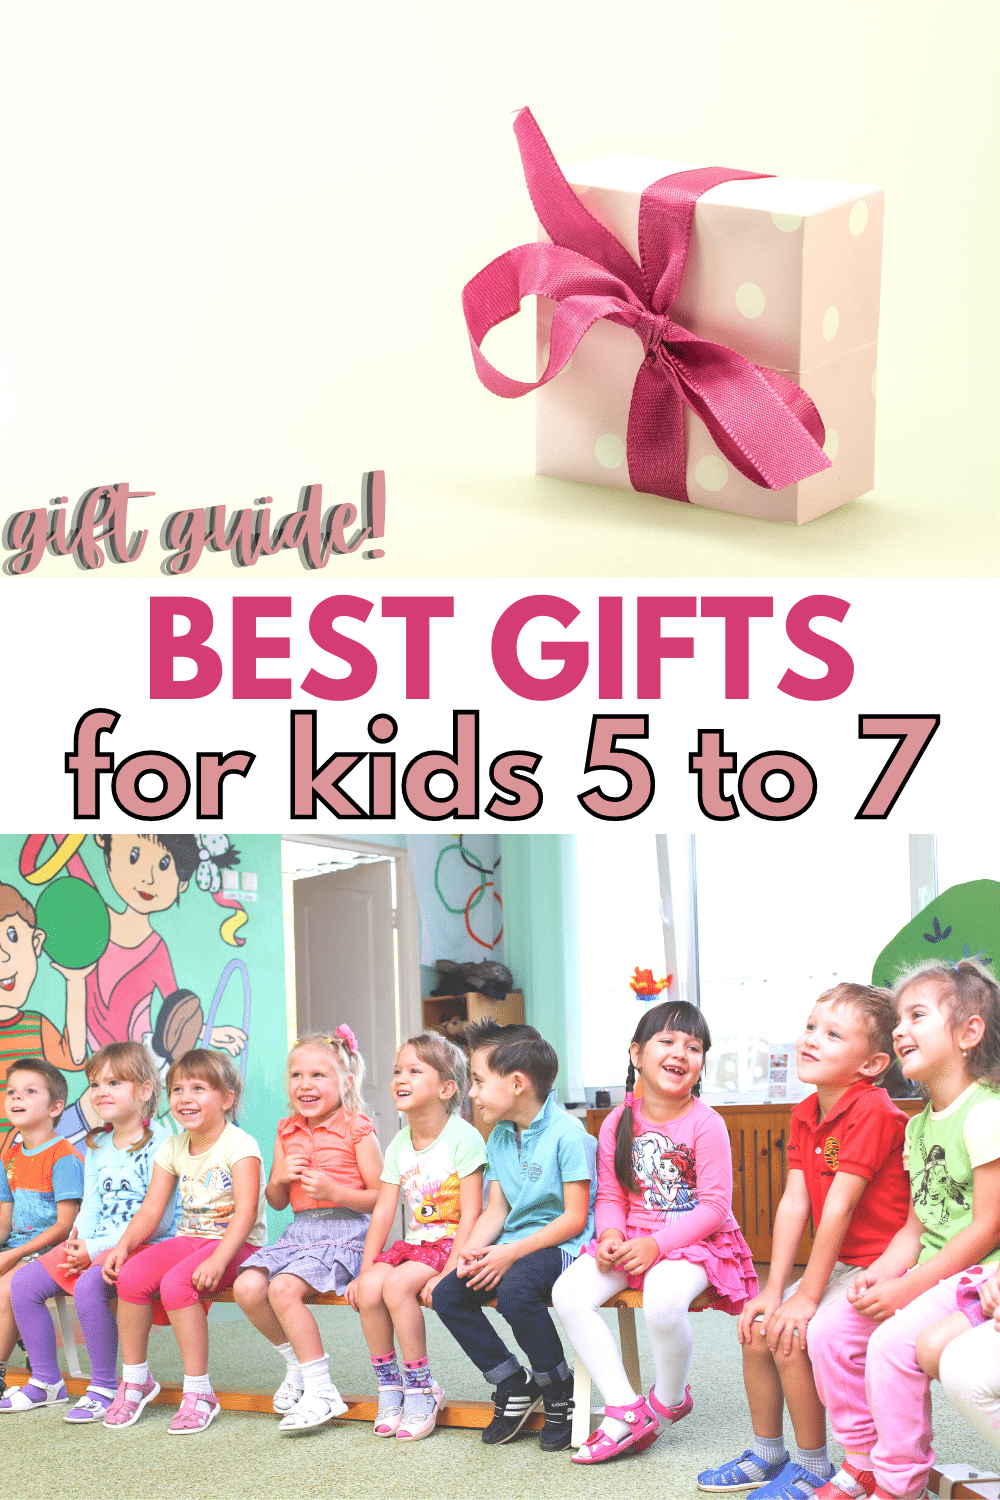 There are plenty of great gifts that early elementary kids flip for that they can play with their friends. Here's some of the best gifts for kids 5-7. #giftguide #giftideas #forkids #earlyelementary via @wondermomwannab